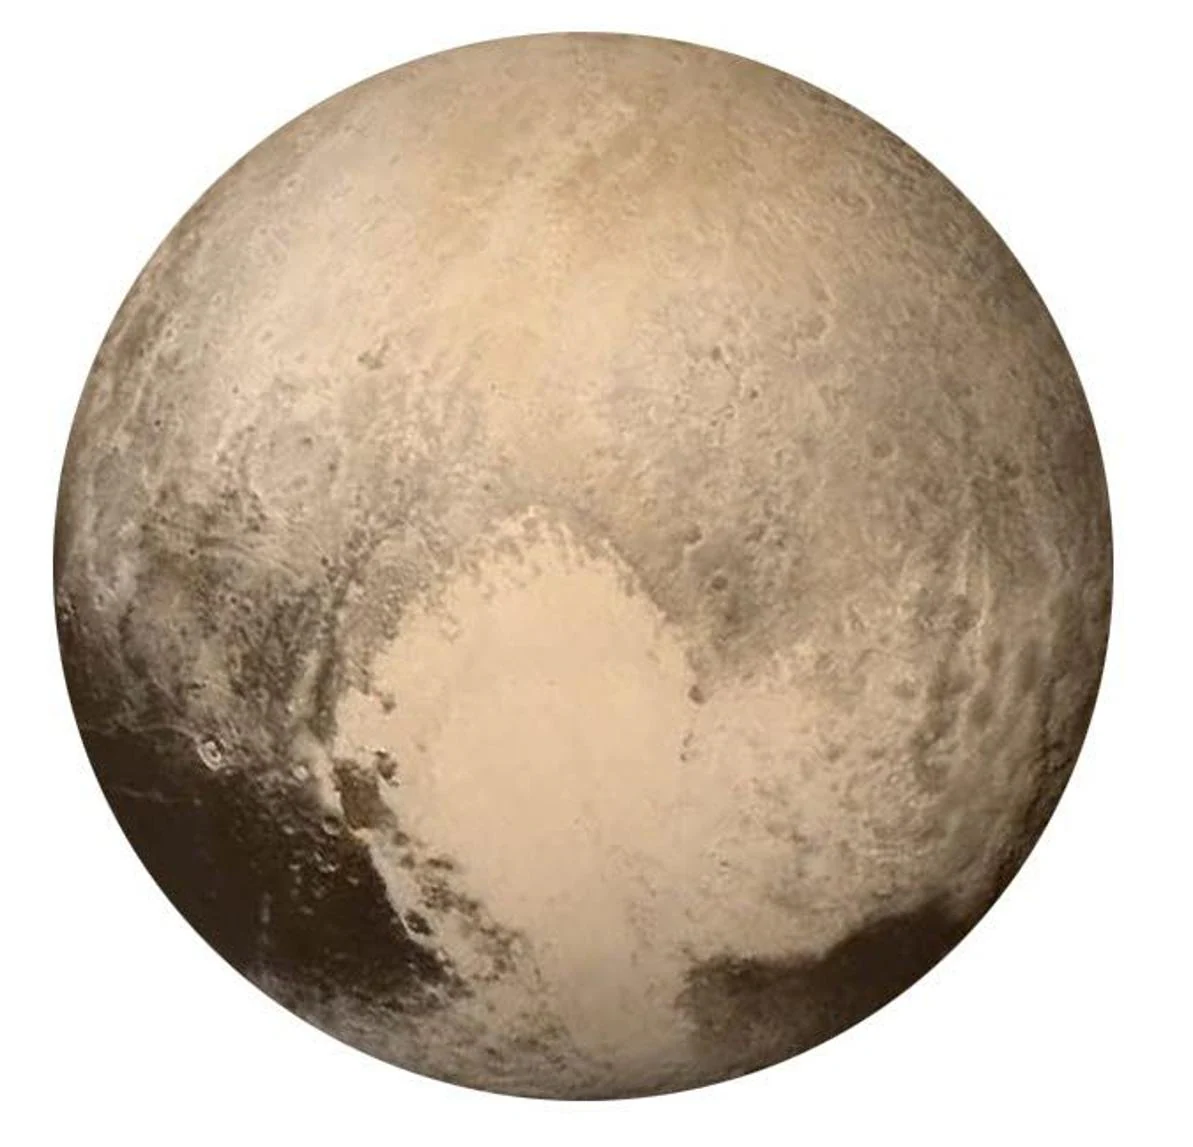 NASA |  The study suggests that Pluto's internal structure is different than previously thought